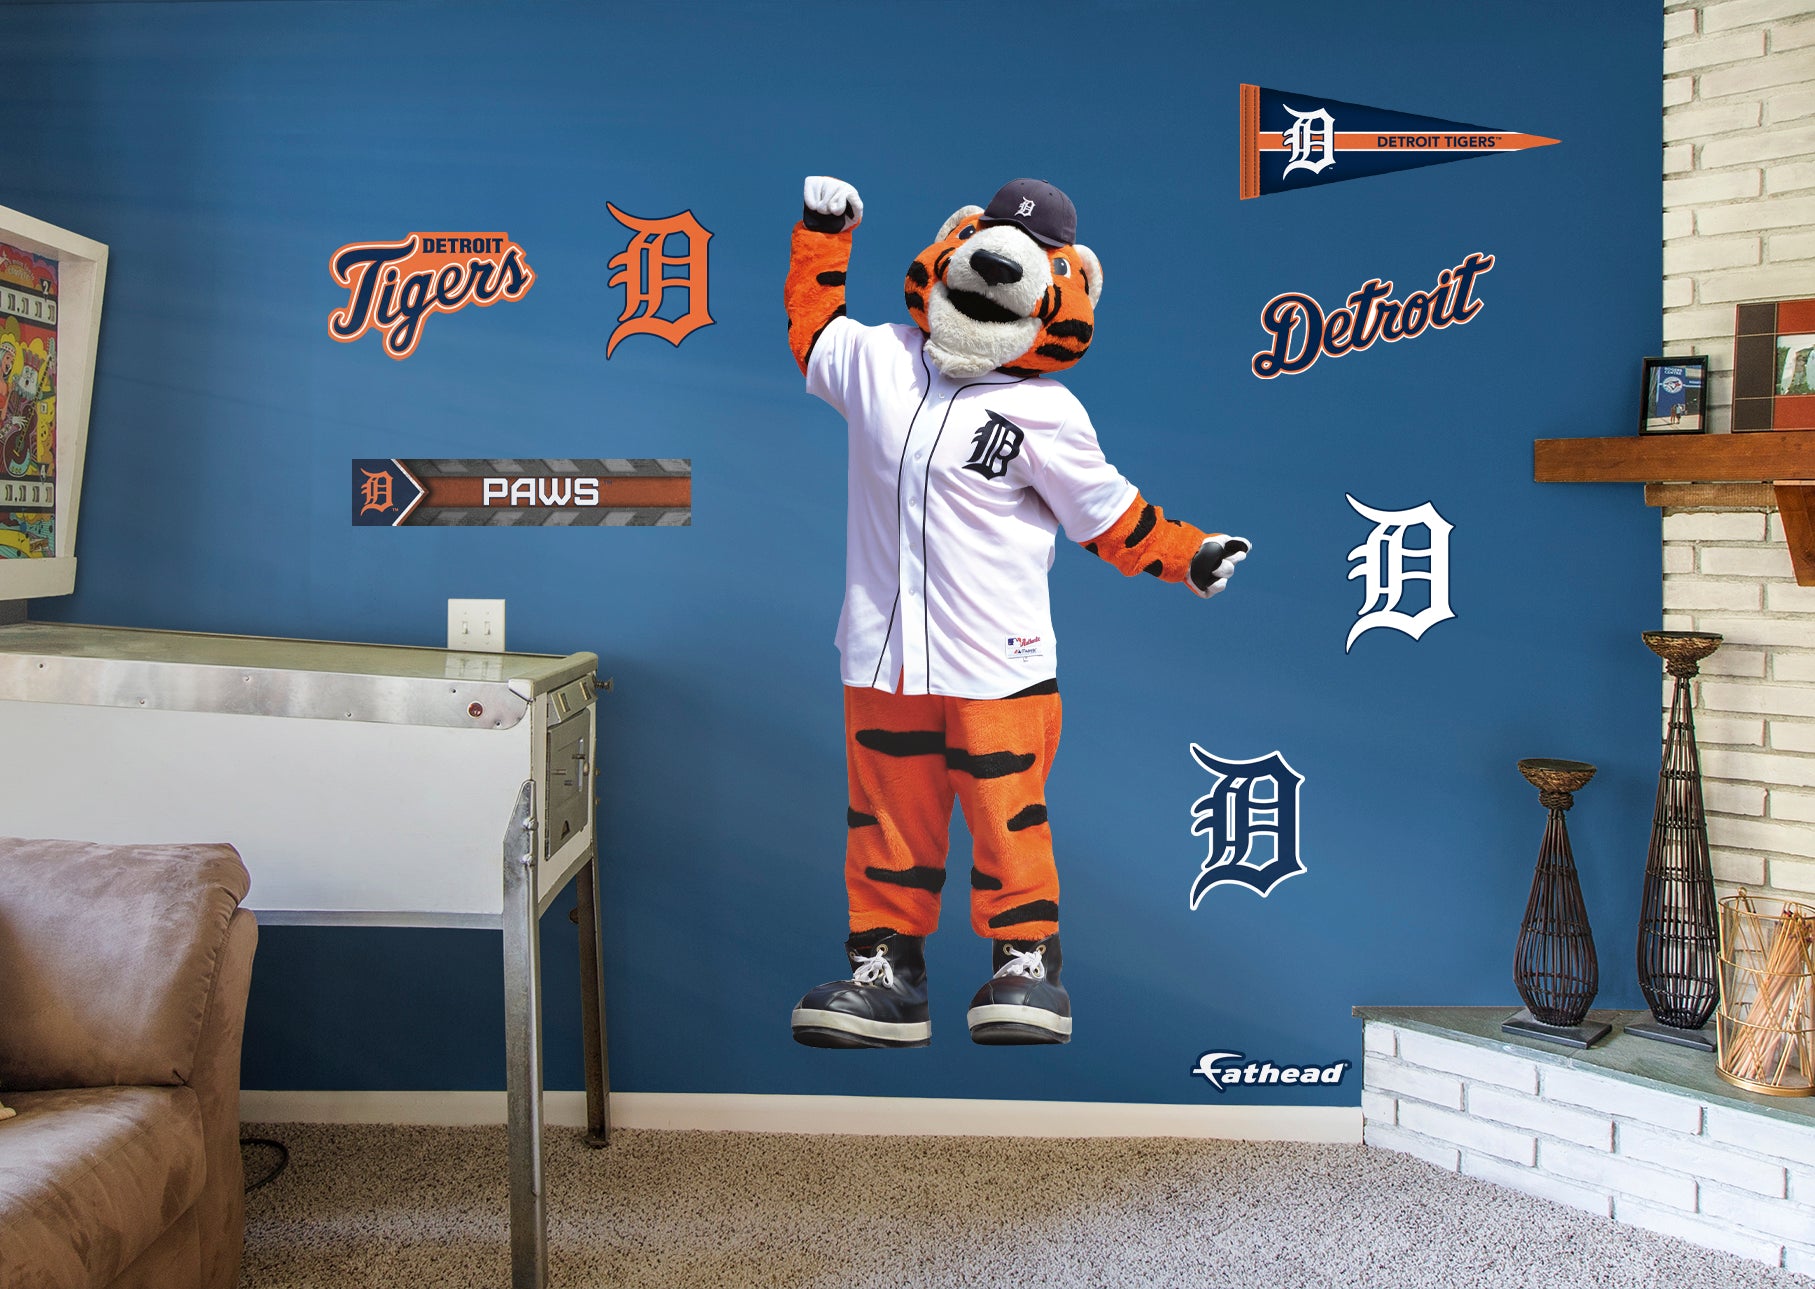 Furry, frenzied fun with Detroit Tigers mascot Paws